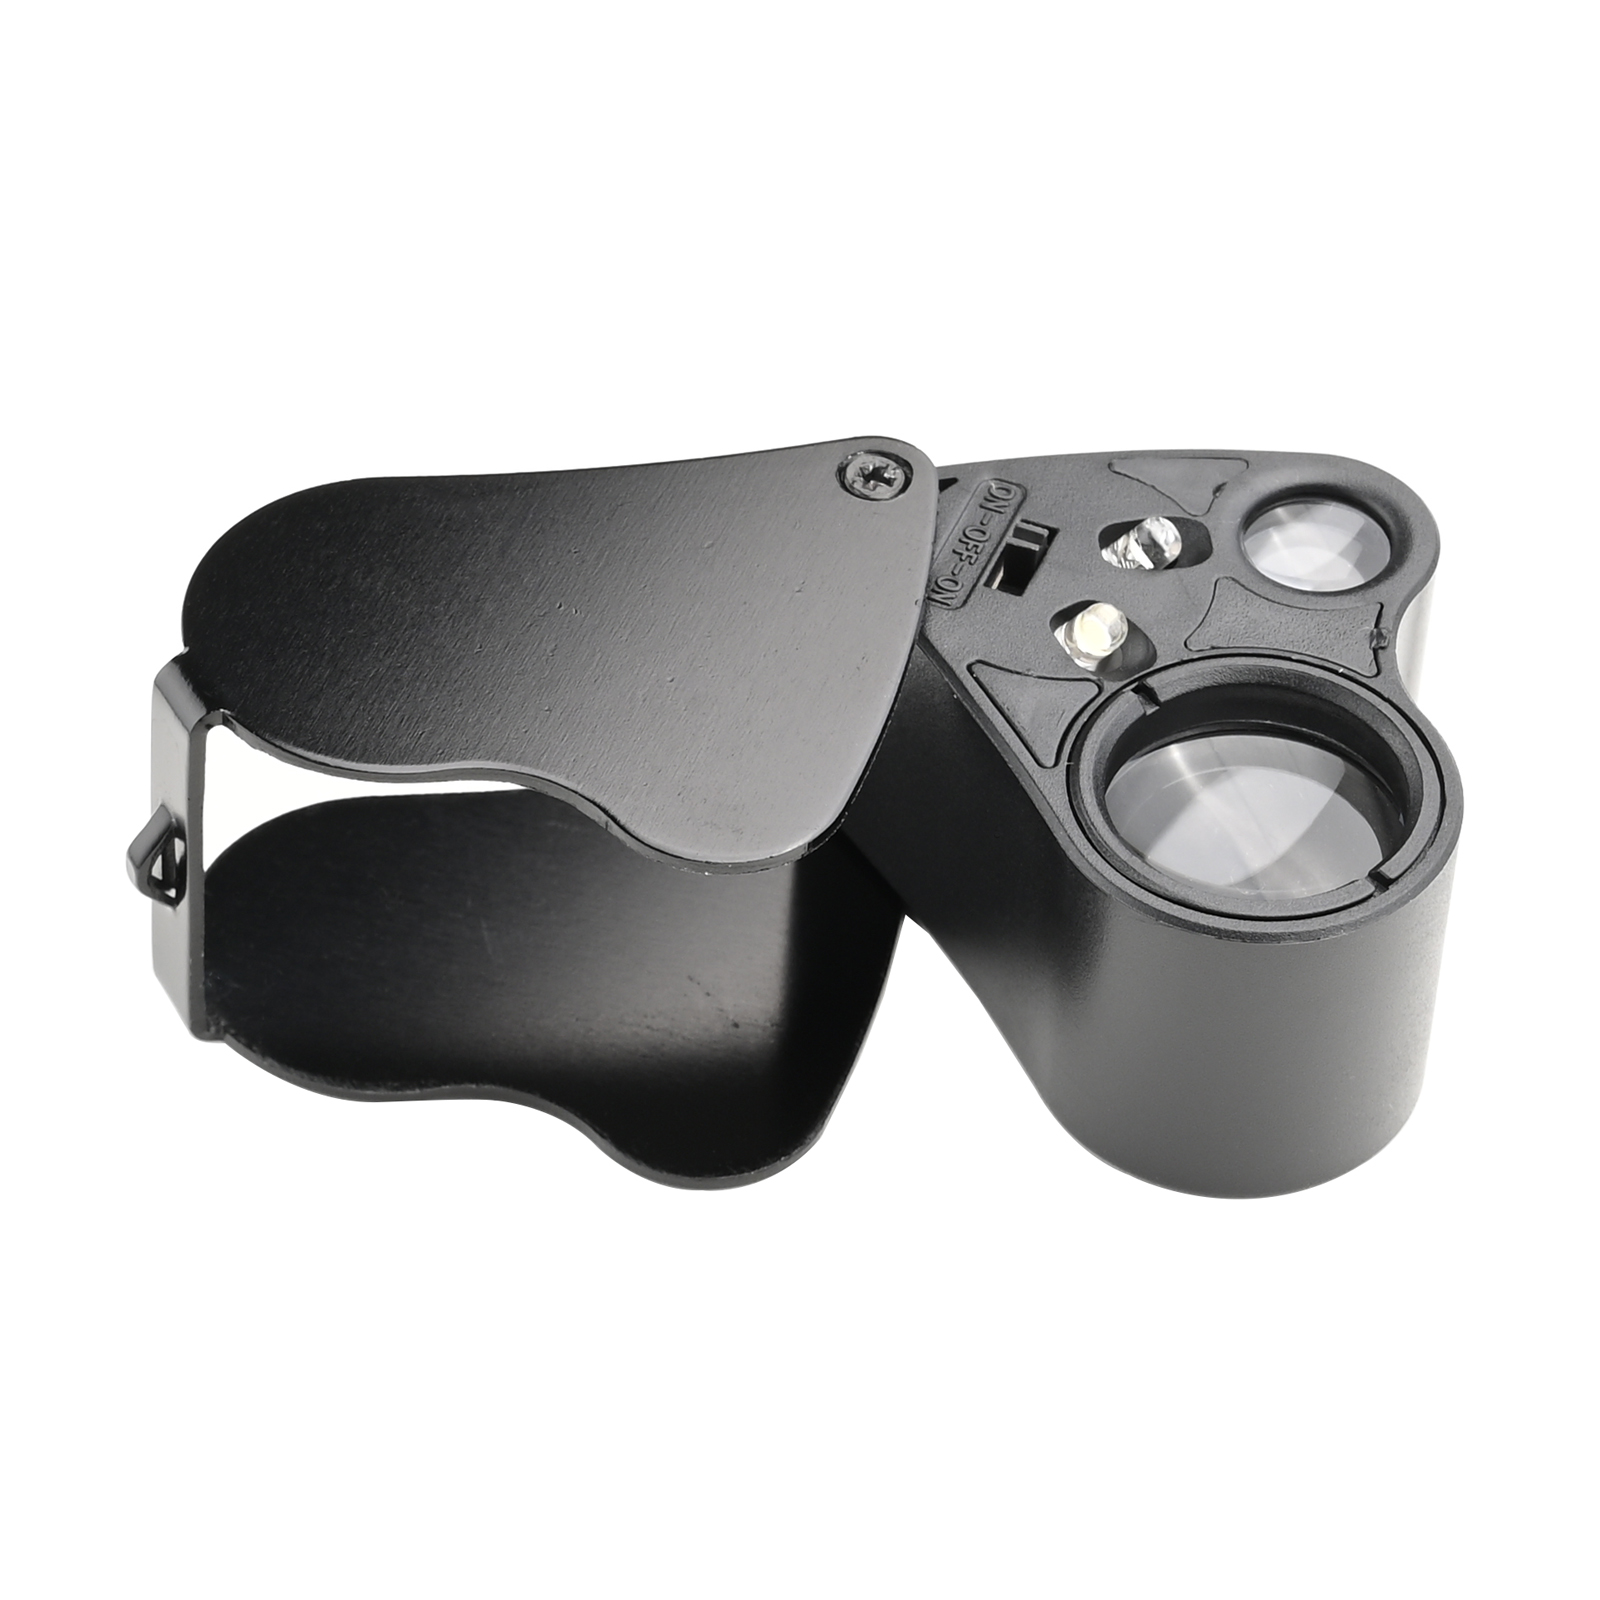 60X Pocket Microscope Jewelry Magnifier Loupe - GWSY2506SG - IdeaStage  Promotional Products